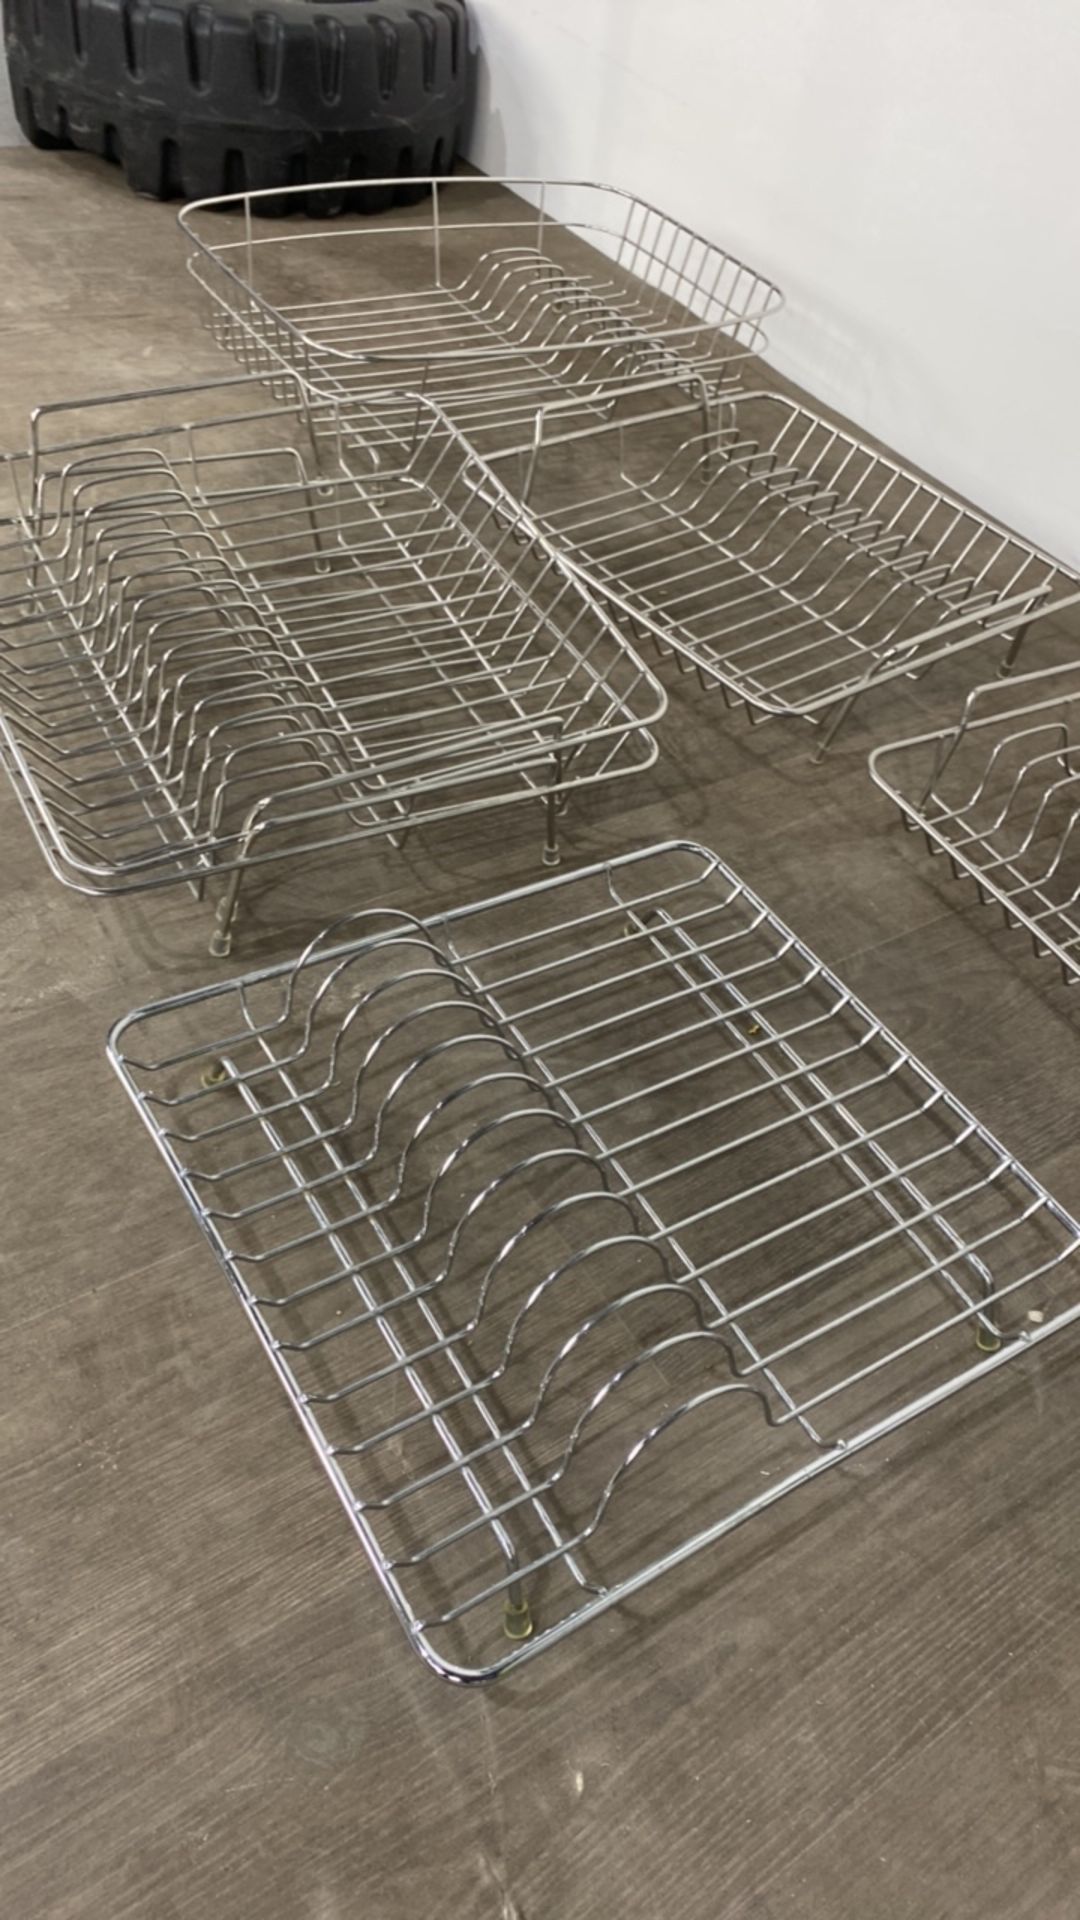 Stainless Steel Drying Racks x6 - Image 3 of 3